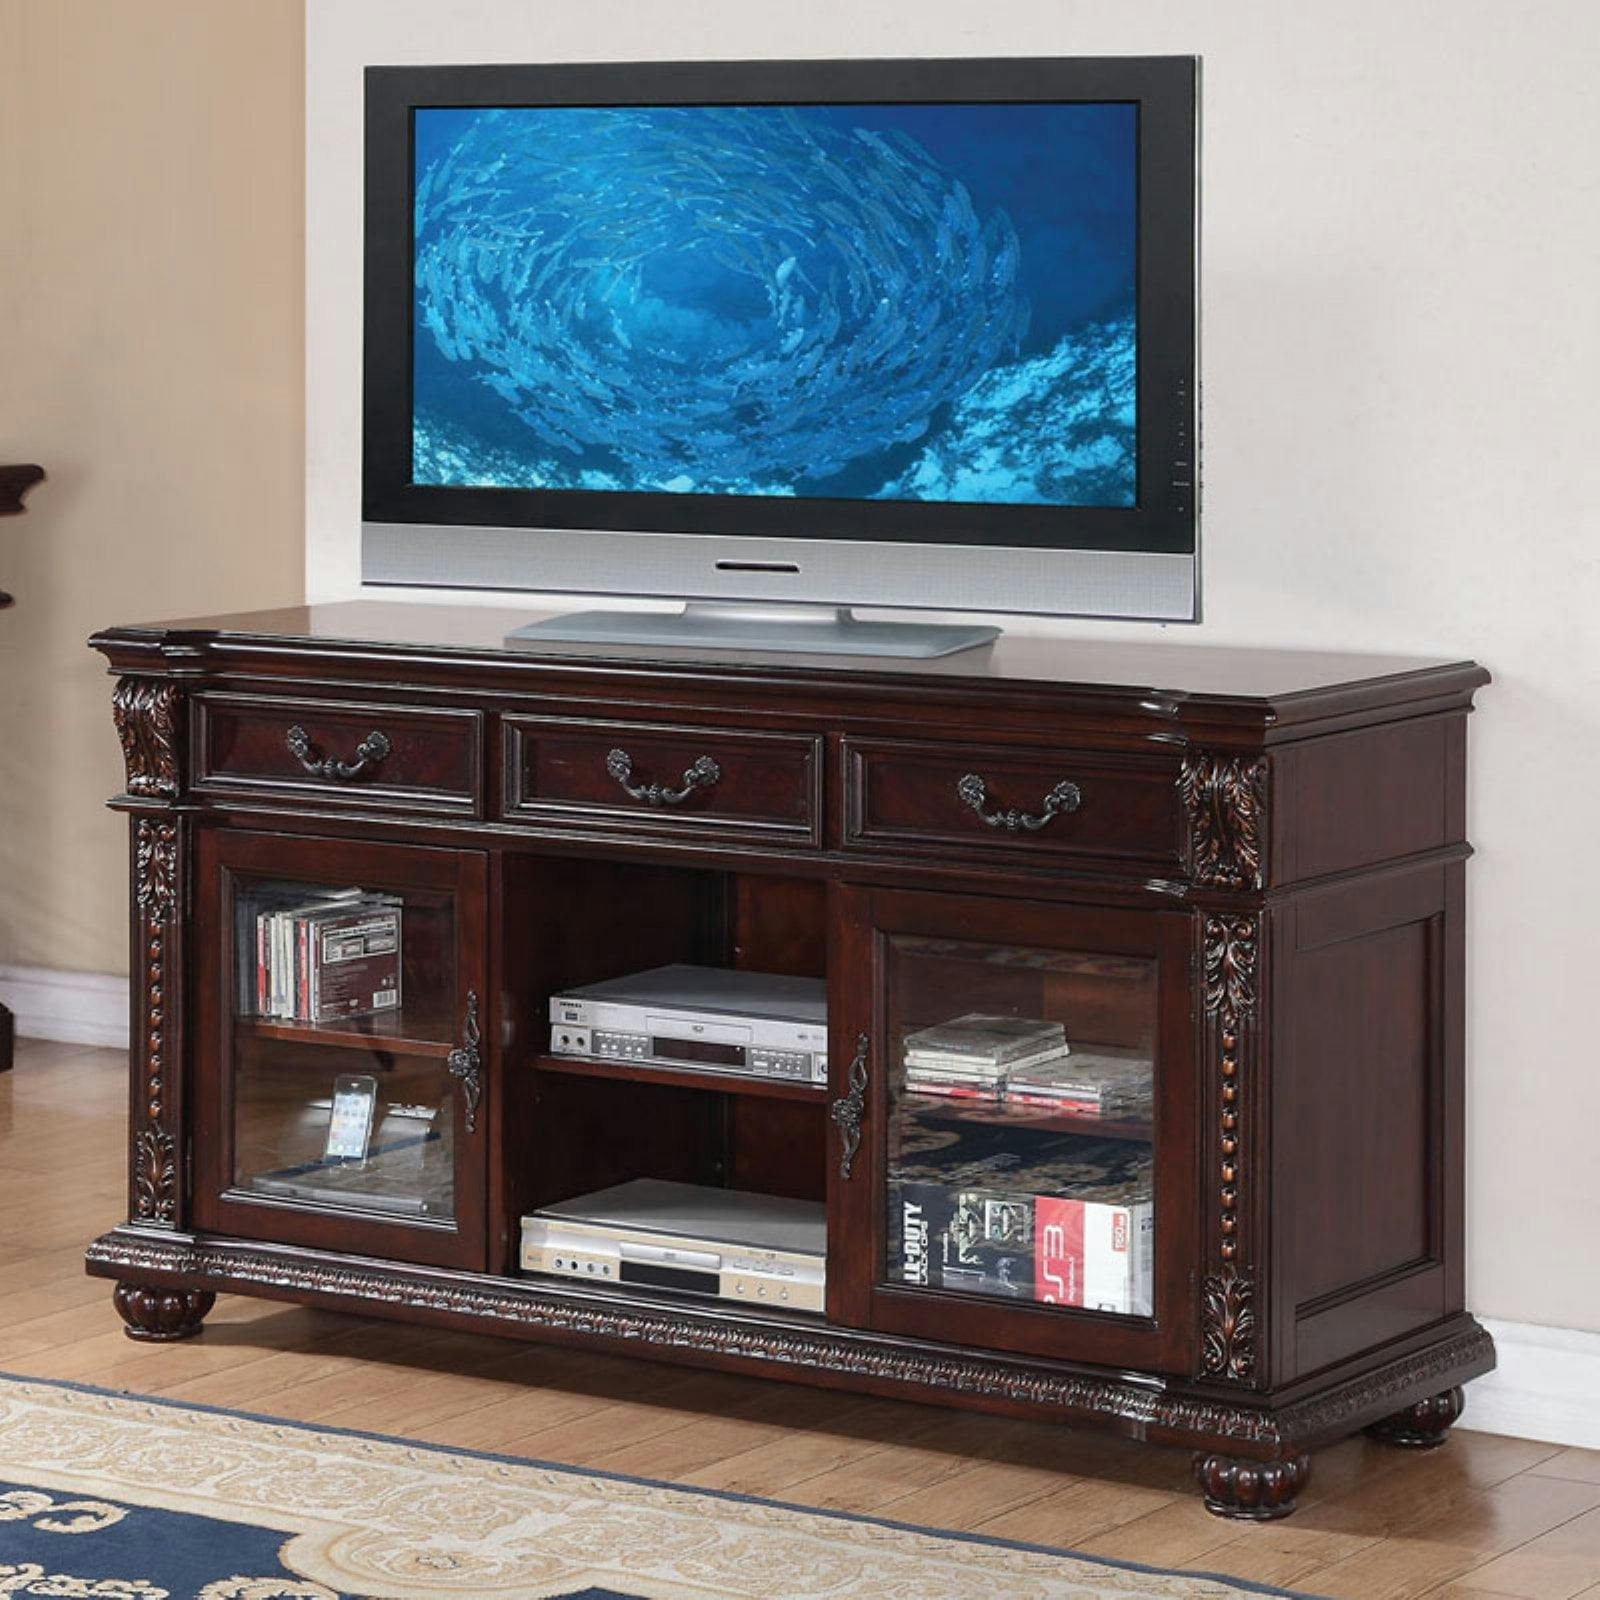 Cherry Finish Elegance 66" Wooden TV Stand with Glass Doors